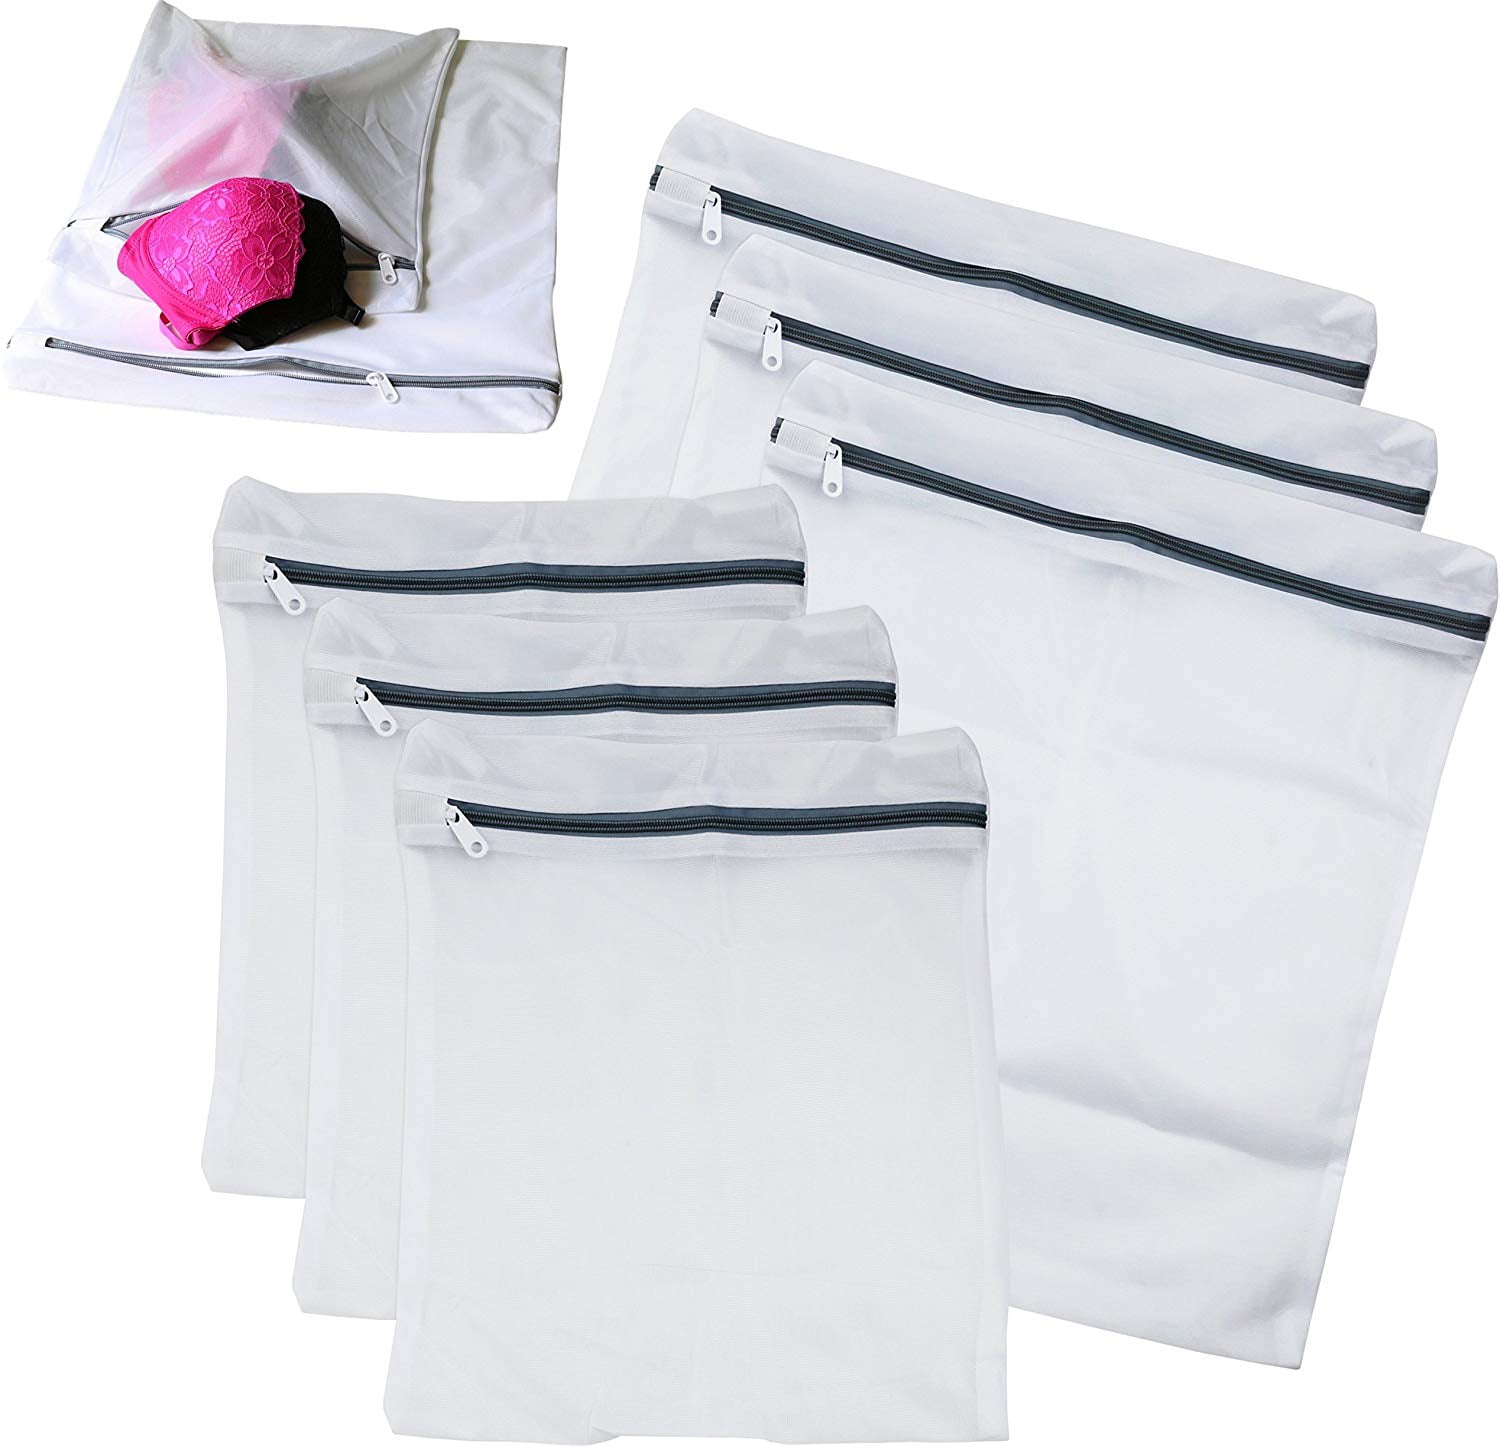 by WashGuard 2 Lingerie Bags for Laundry Protect Delicate Clothes & Underwear 